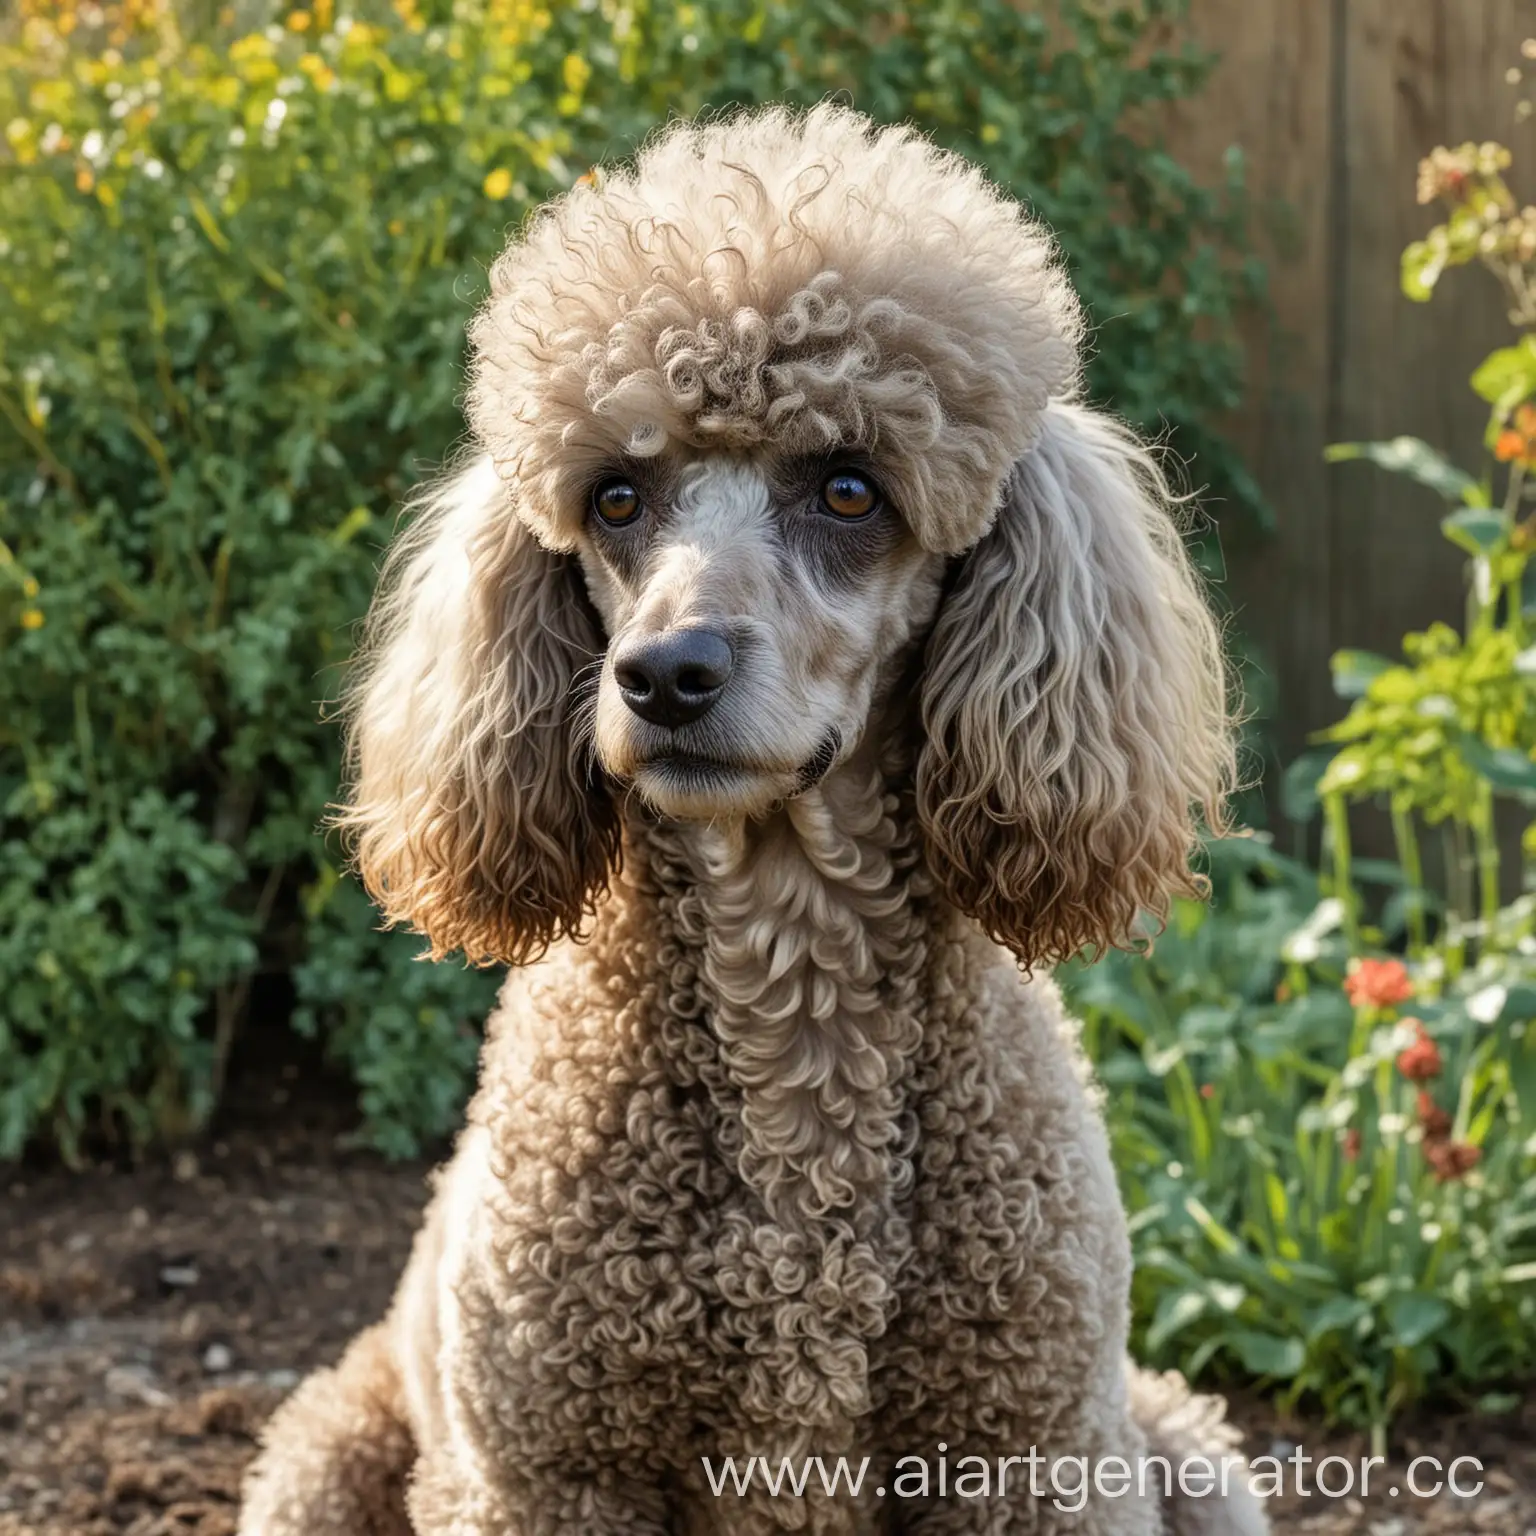 Neglected-Poodle-with-Large-Black-Eyes-in-Garden-Setting